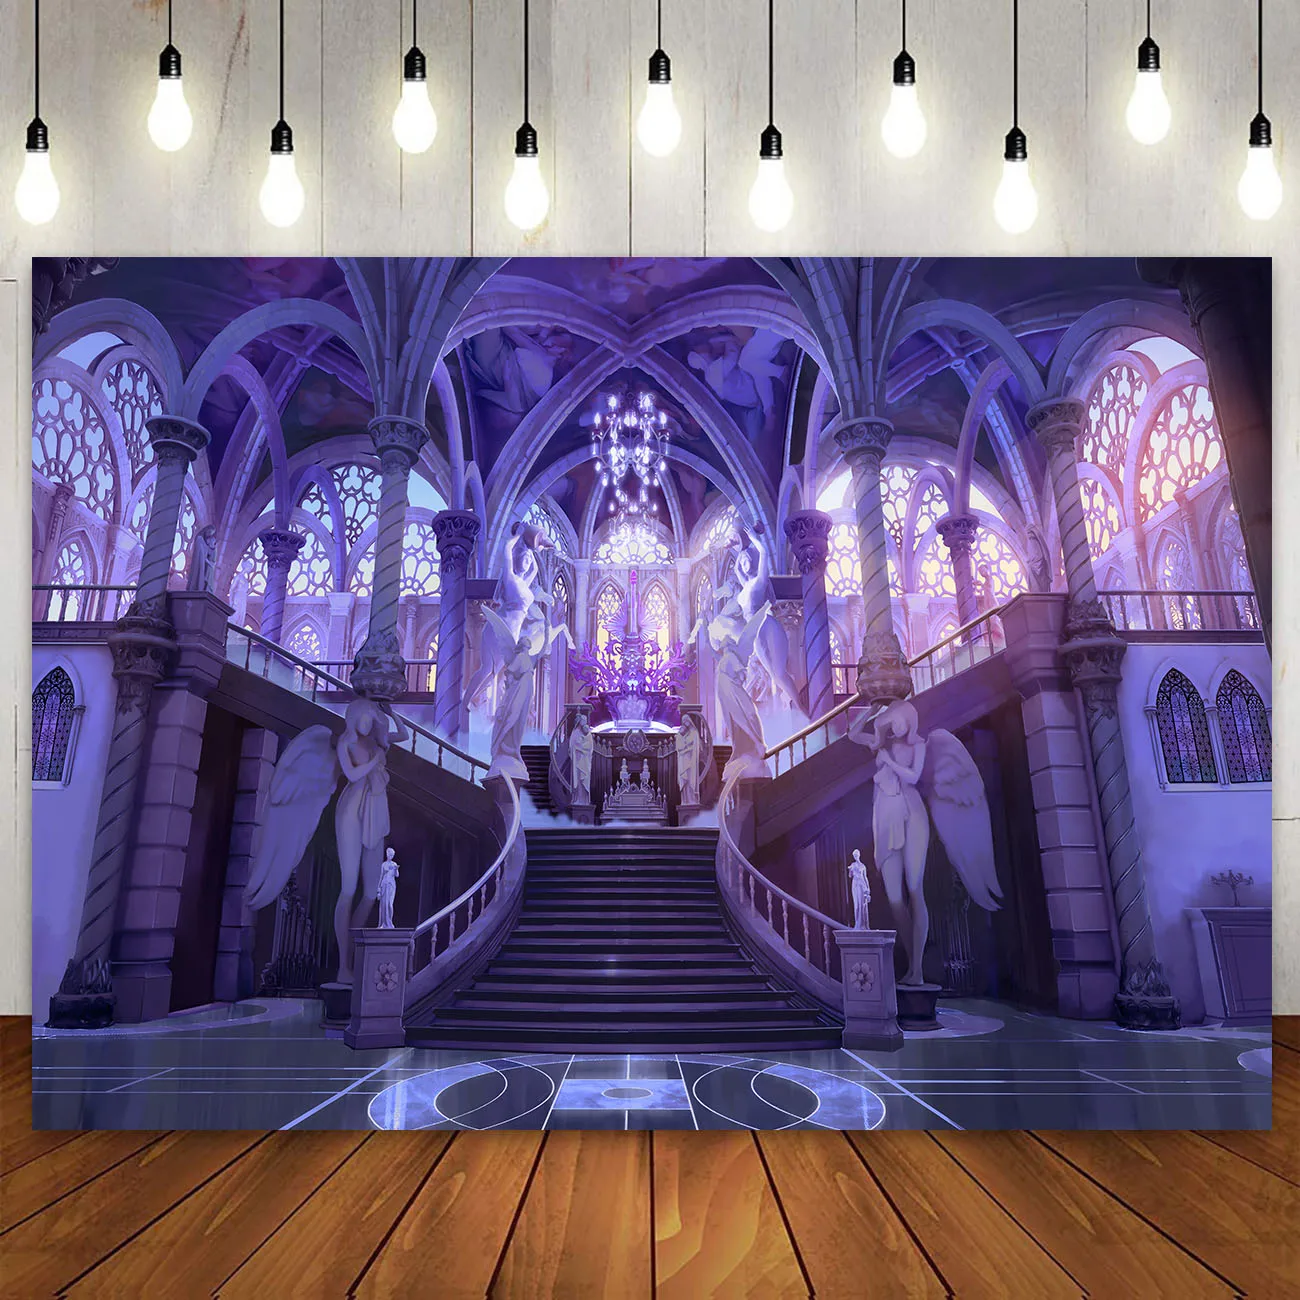 

Palace Stairs Church Backdrop Fantasy Interior Birthday Party Banner Decoration Portrait Wedding Bridal Photography Background